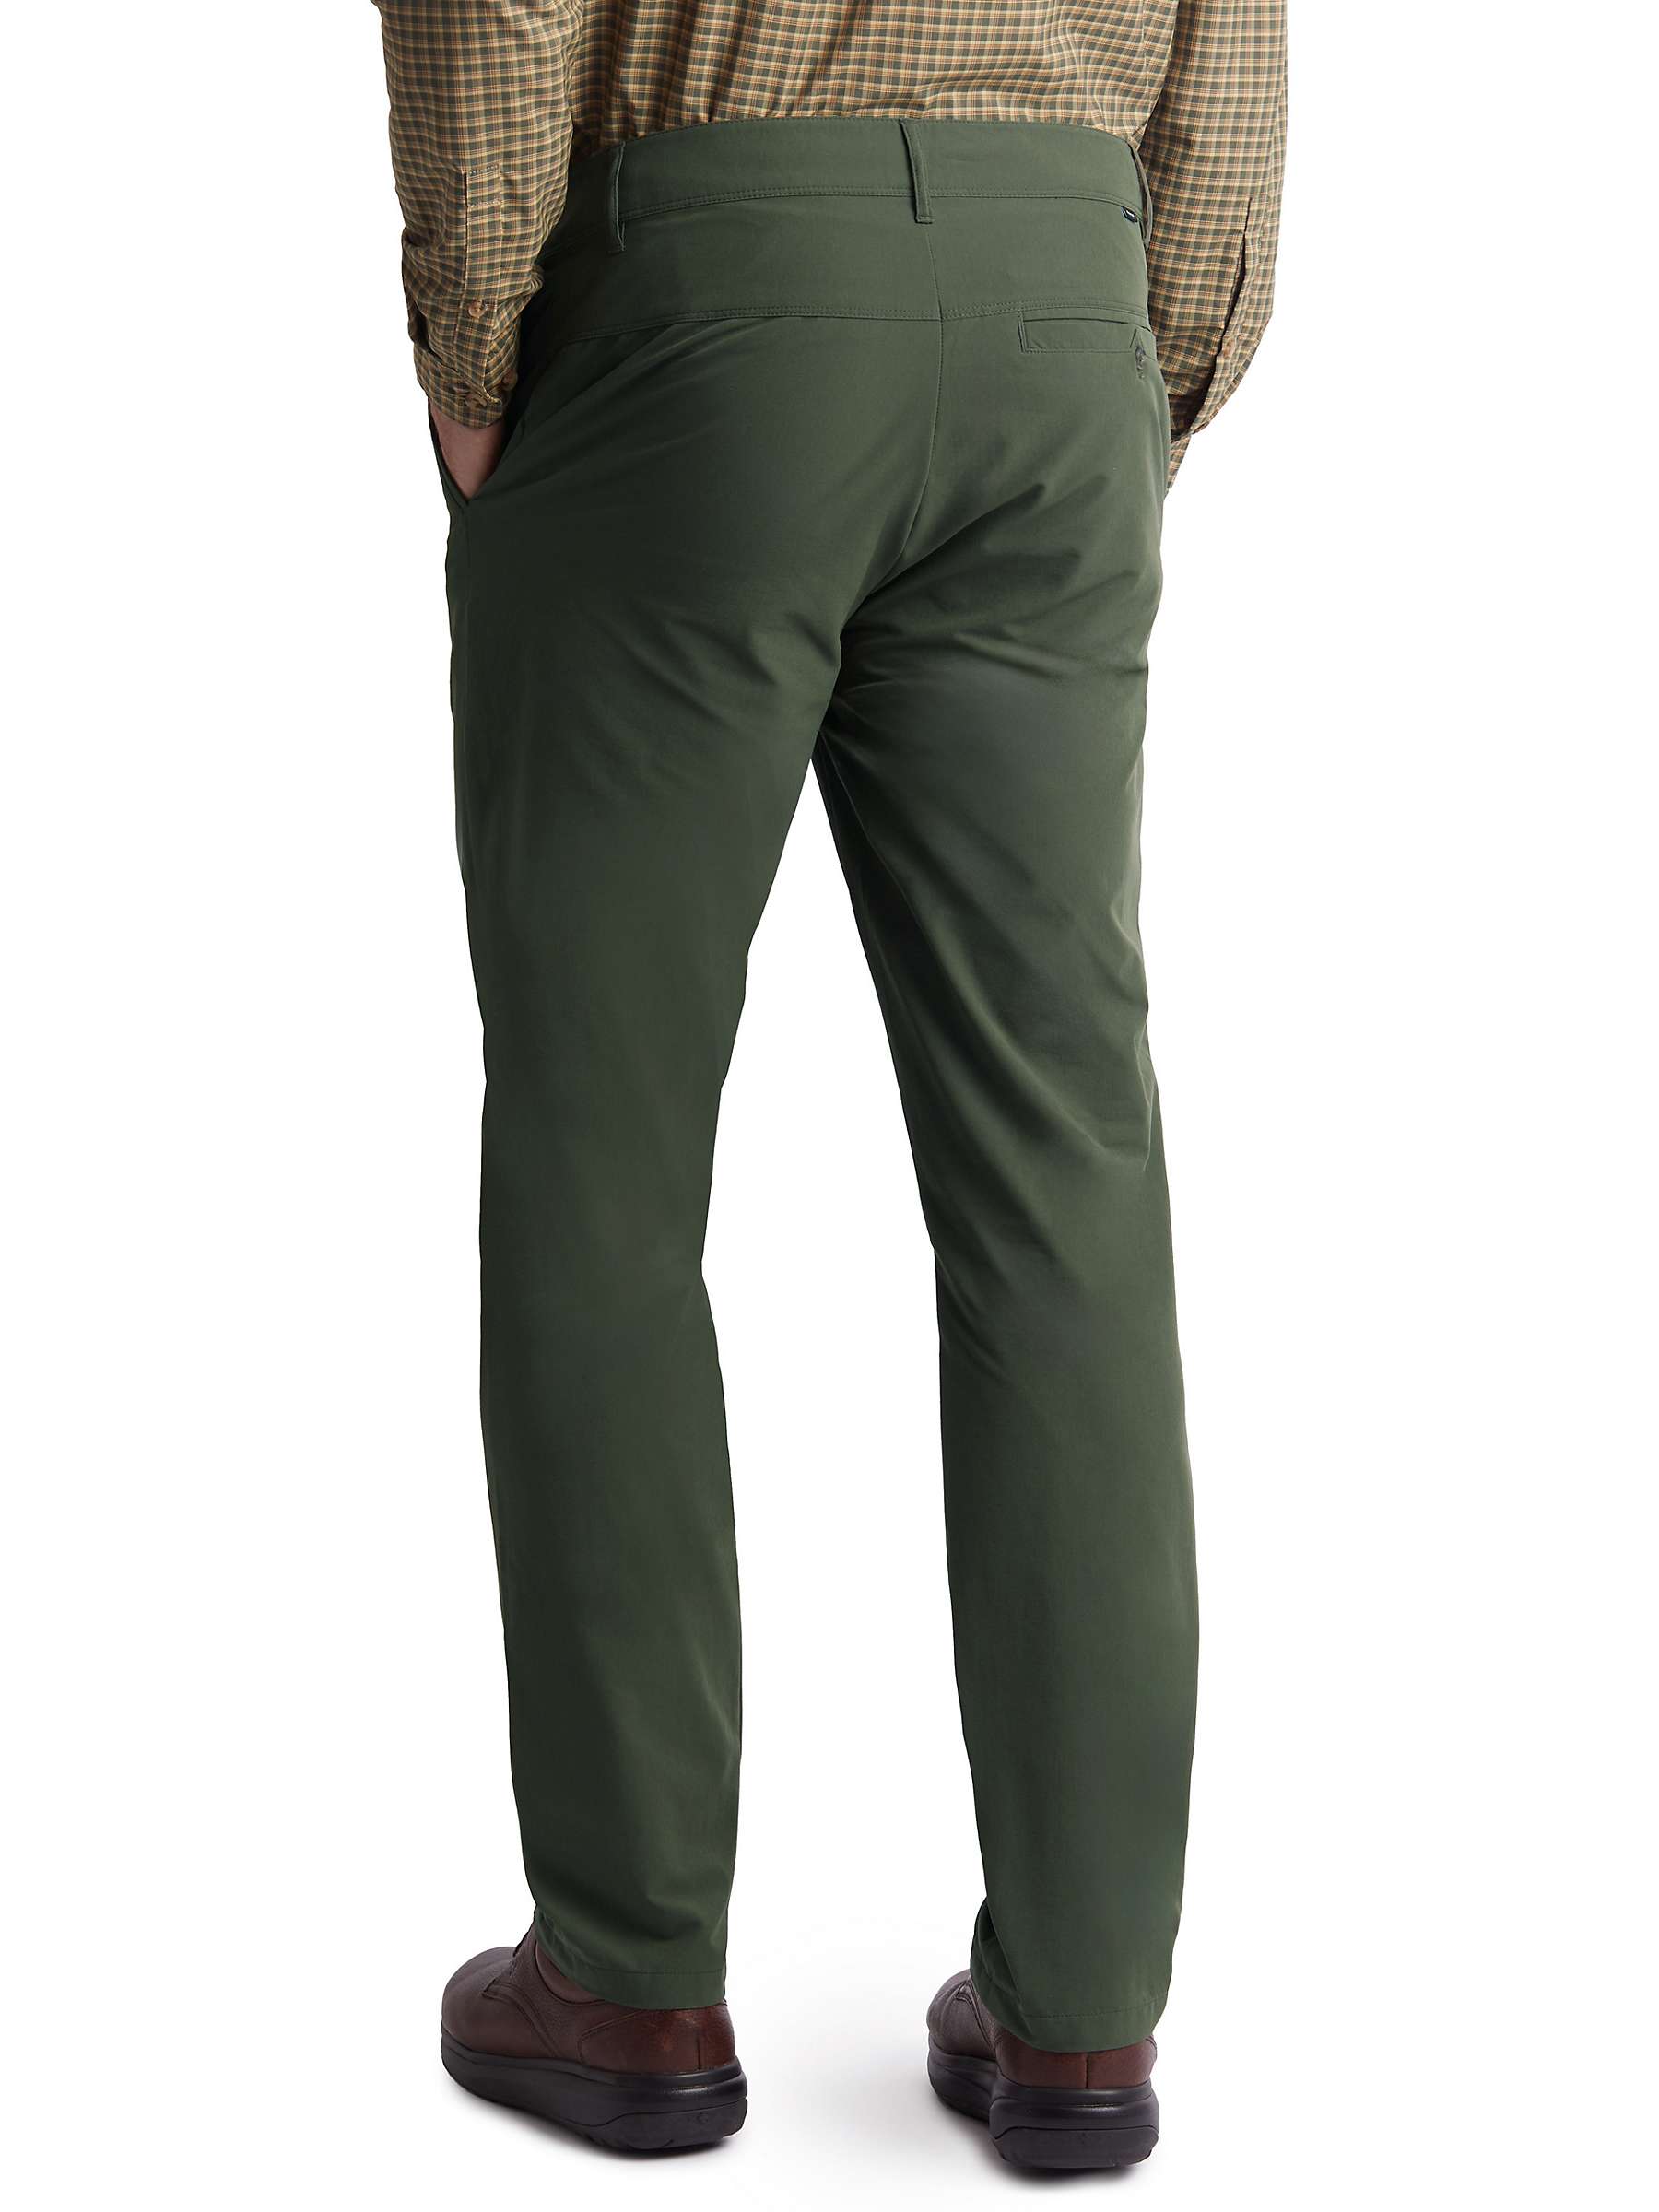 Buy Rohan Riviera Stretch Trousers Online at johnlewis.com